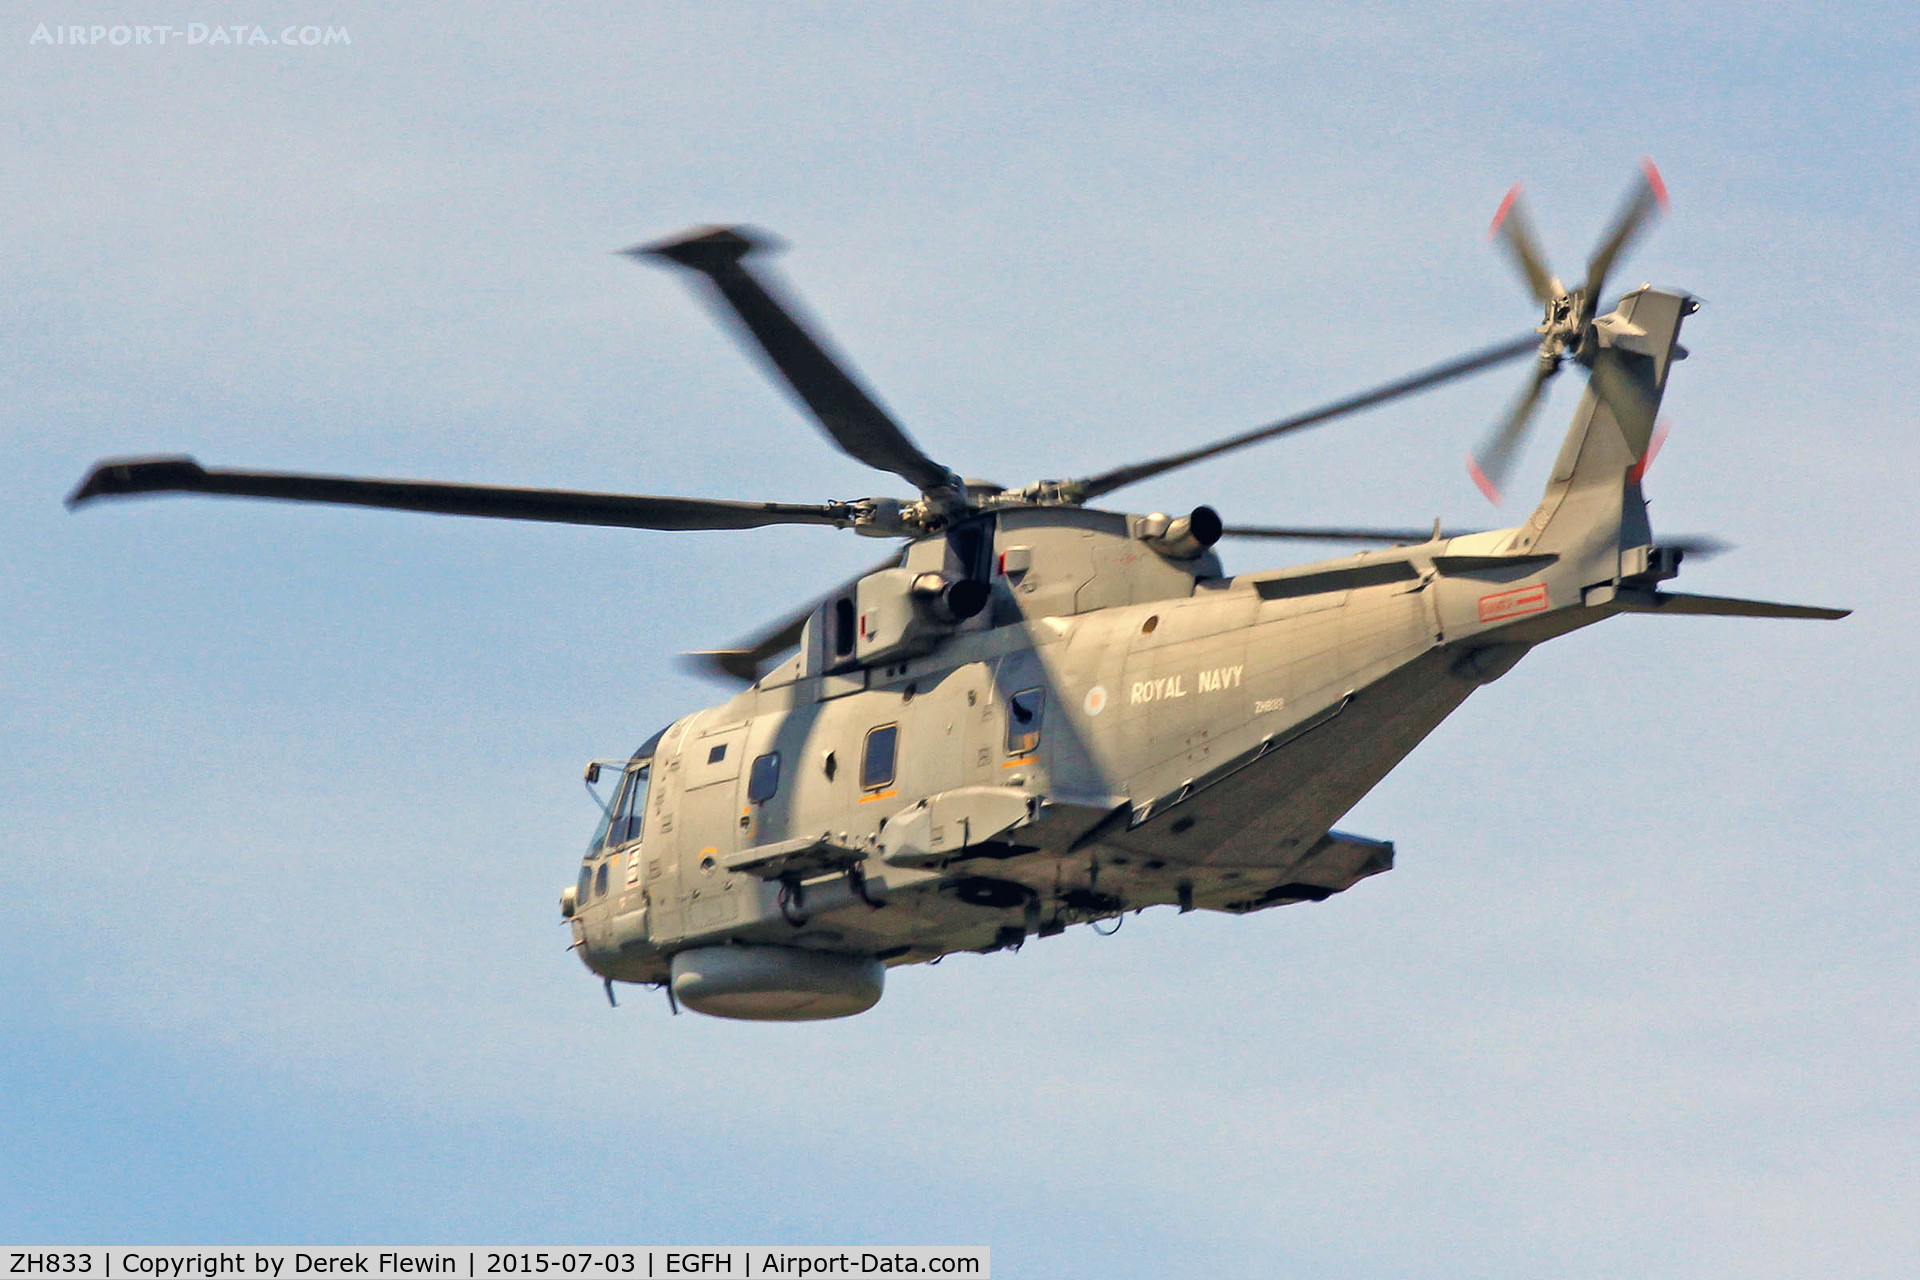 ZH833, 1999 AgustaWestland EH-101 Merlin HM2 C/N 50061/RN13, Merlin HM2, coded 10, callsign Excalubur 8, 820 NAS based at RNAS Culdrose, seen departing runway 22 after a low fly by.